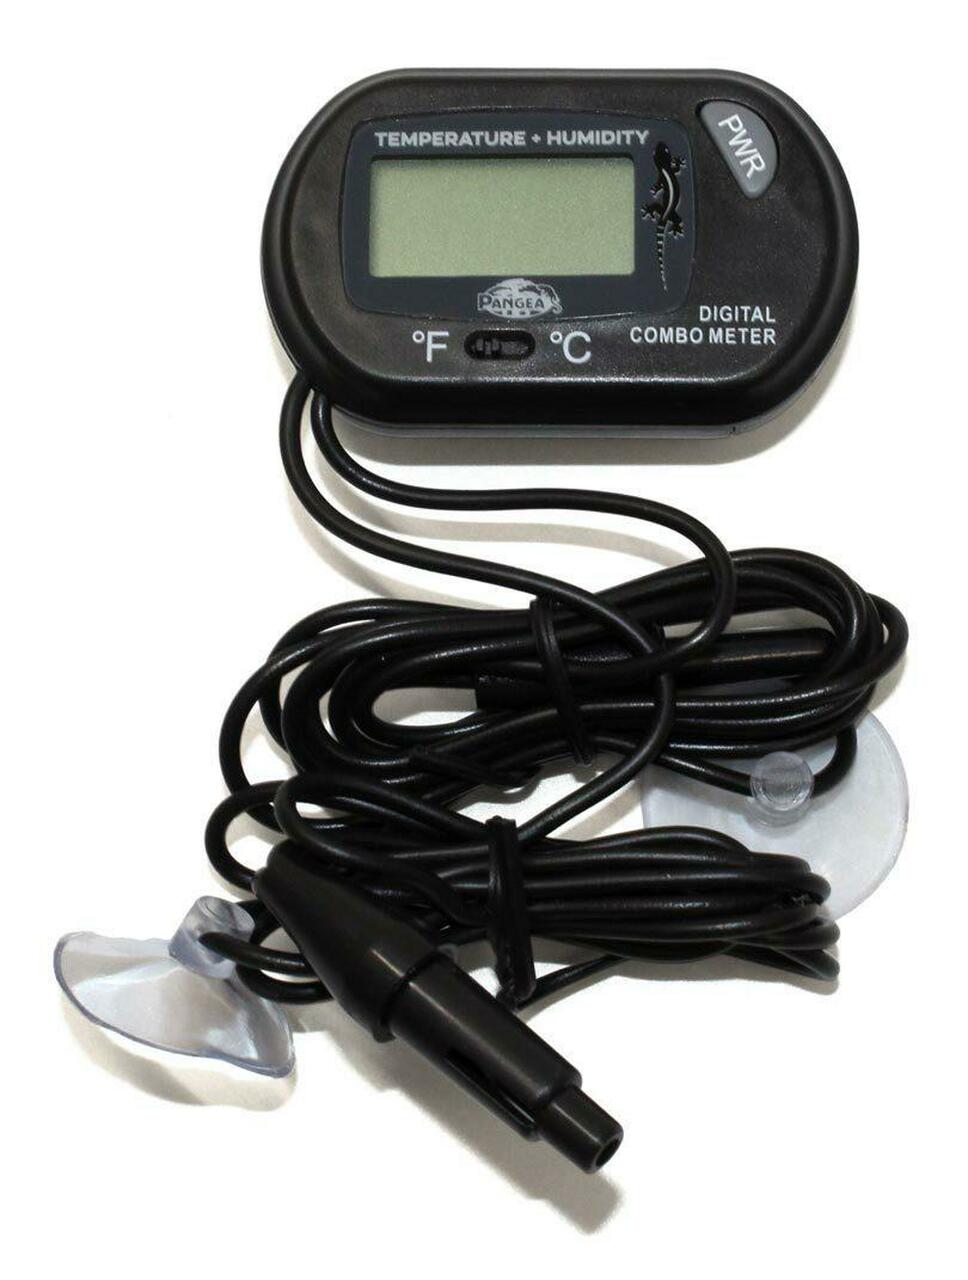 ZOO MED Dual Analog Thermometer & Humidity Gauge 